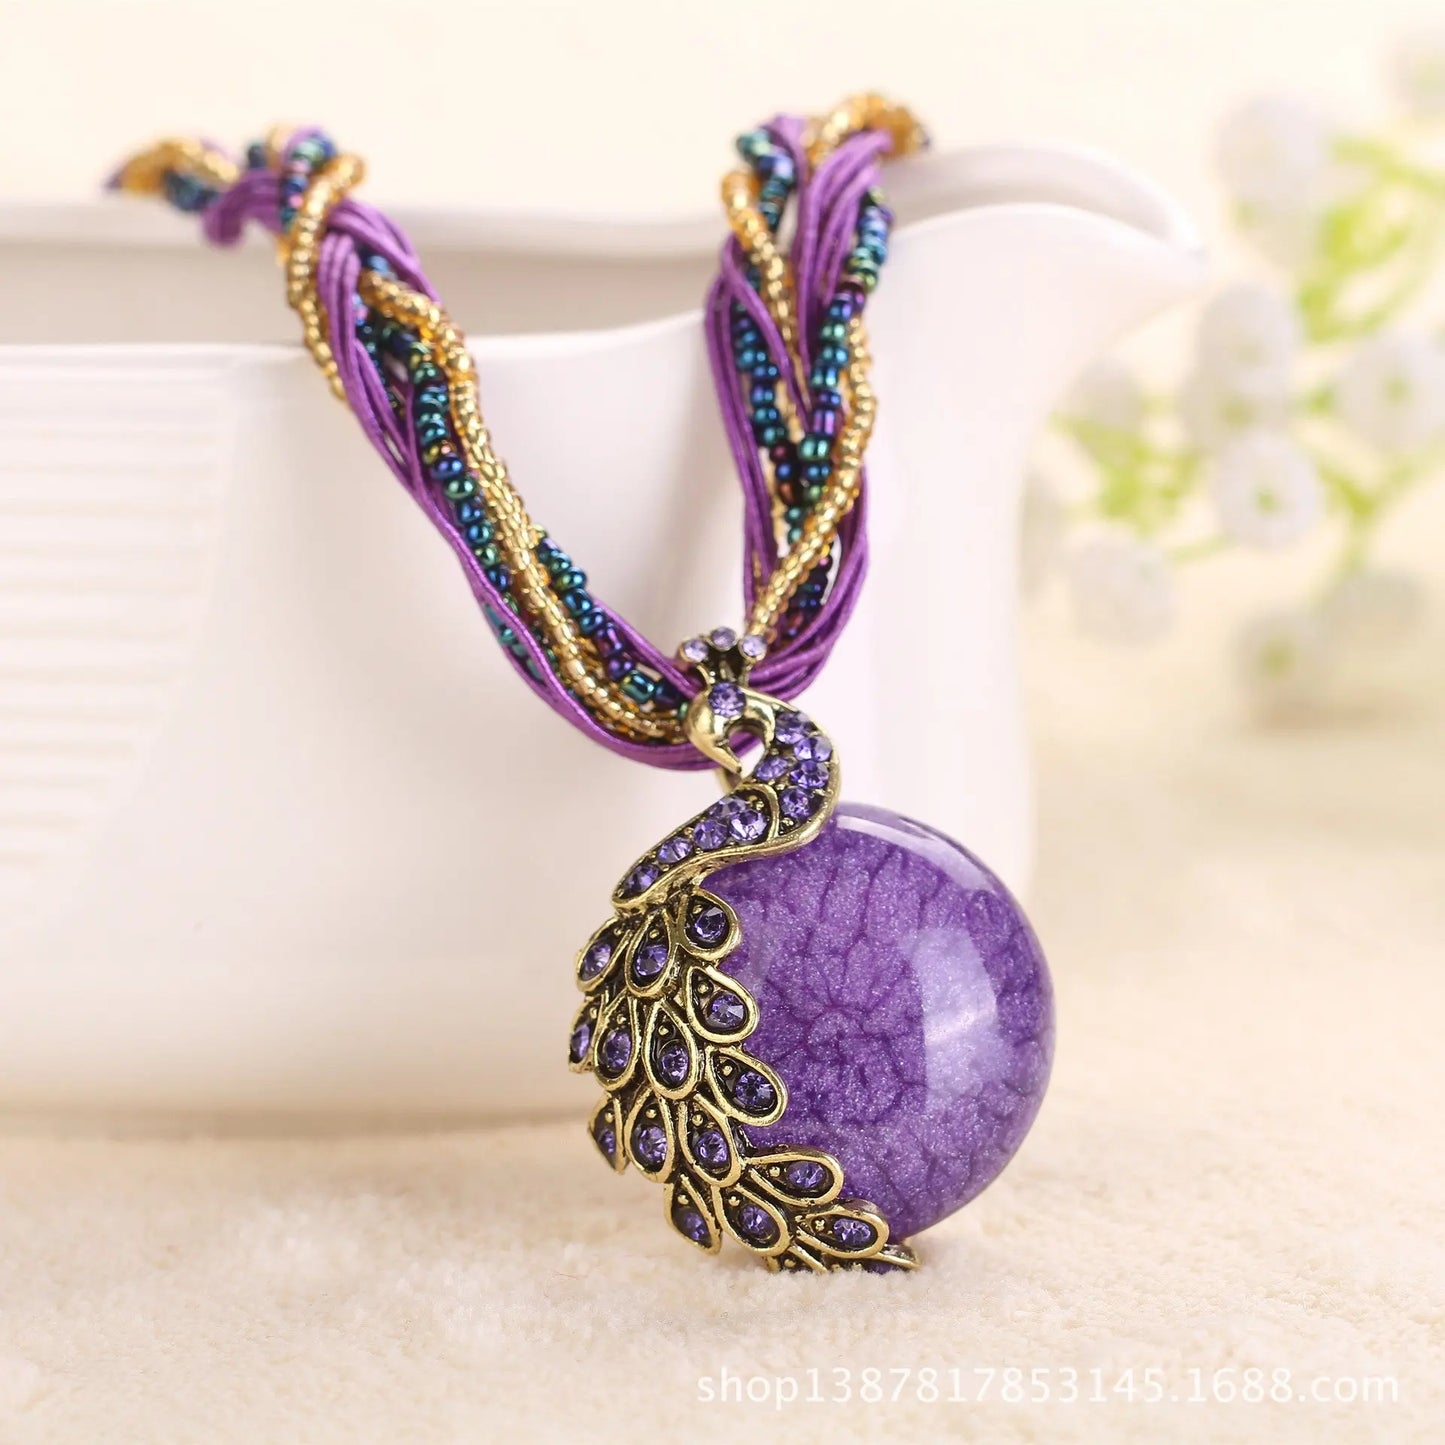 Boho Ethnic Jewelry Choker Handmade Pendant Necklace Natural Stone Bead Peacock Statement Maxi Necklace for Women Girls Gifts - Trending's Arena Beauty Boho Ethnic Jewelry Choker Handmade Pendant Necklace Natural Stone Bead Peacock Statement Maxi Necklace for Women Girls Gifts Electronics Facial & Neck purple